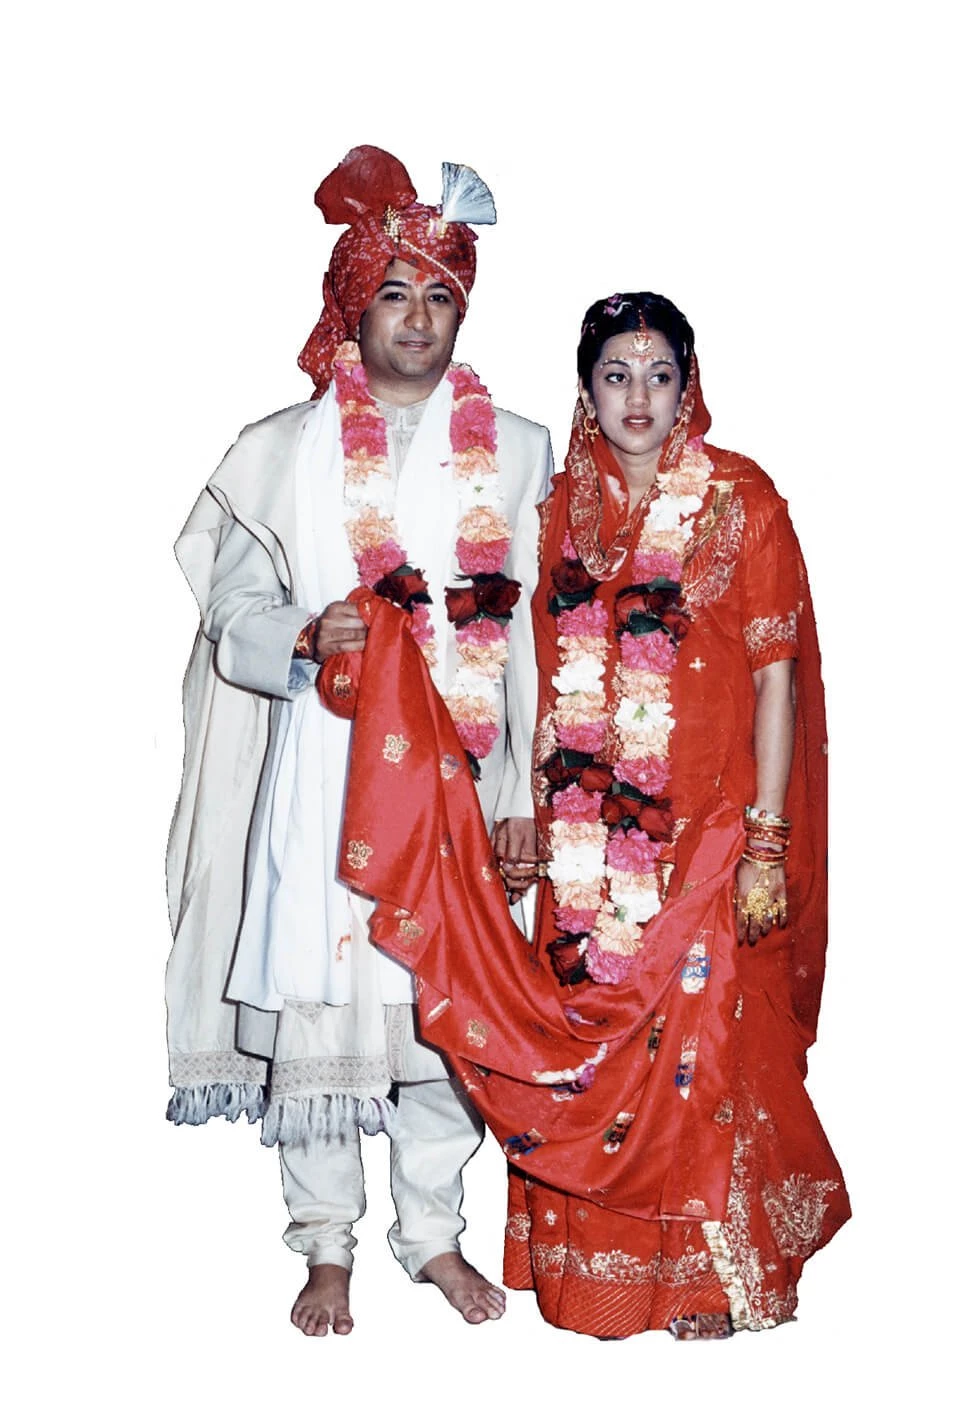 A picture of a couple standing together wearing traditional Indian clothing. The woman has a dress in red and the man is in white with a red head scarf.